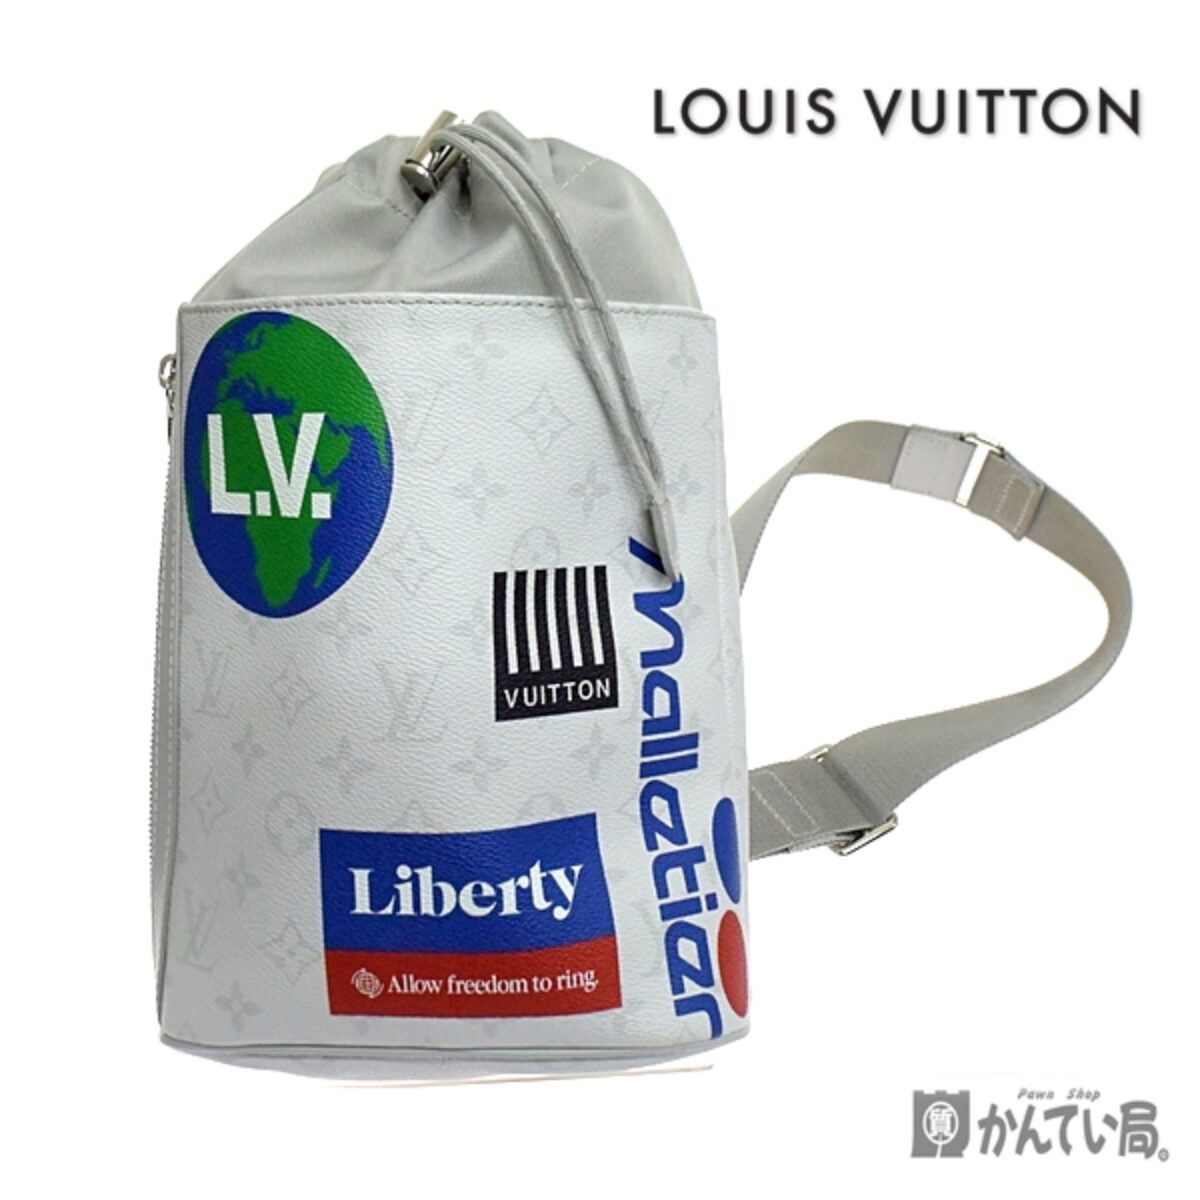 LOUIS VUITTON ルイヴィトン モノグラム チョーク スリングバッグ ...